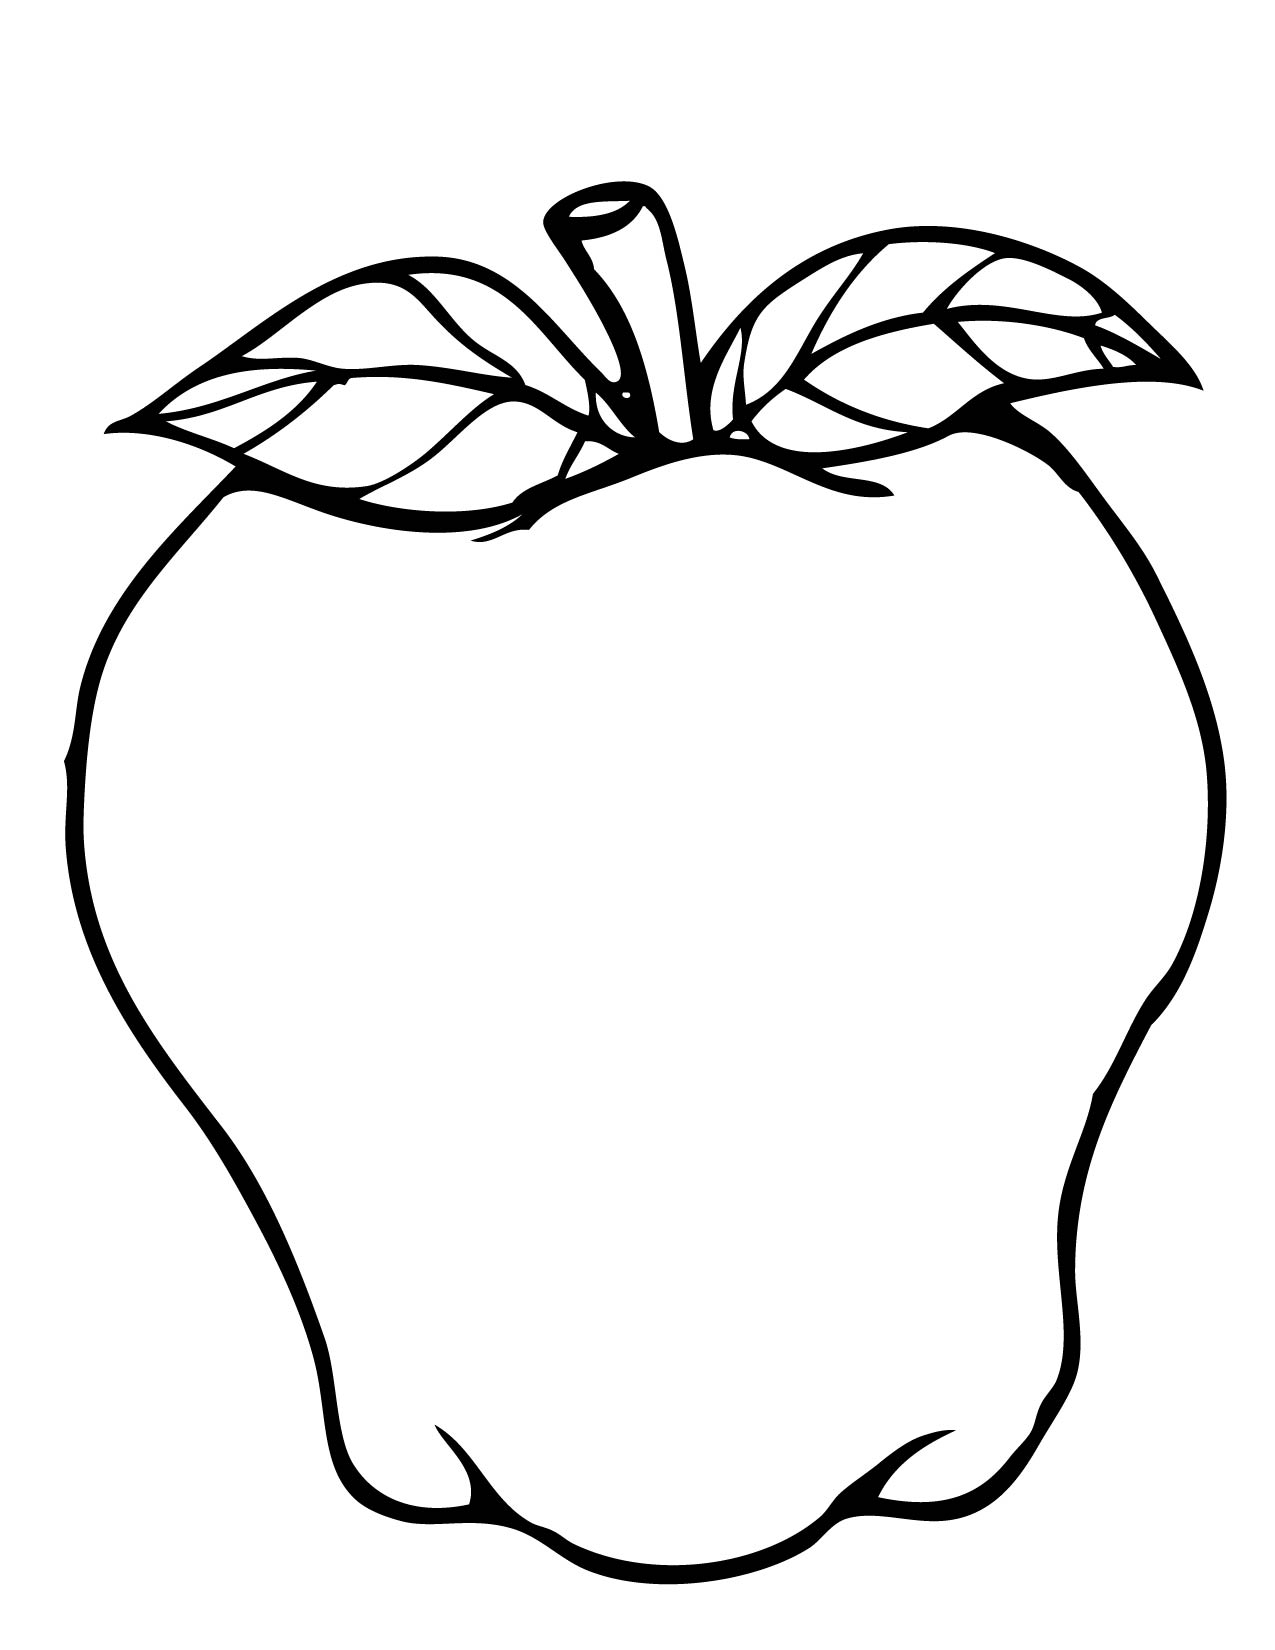 apple clipart to color - photo #13